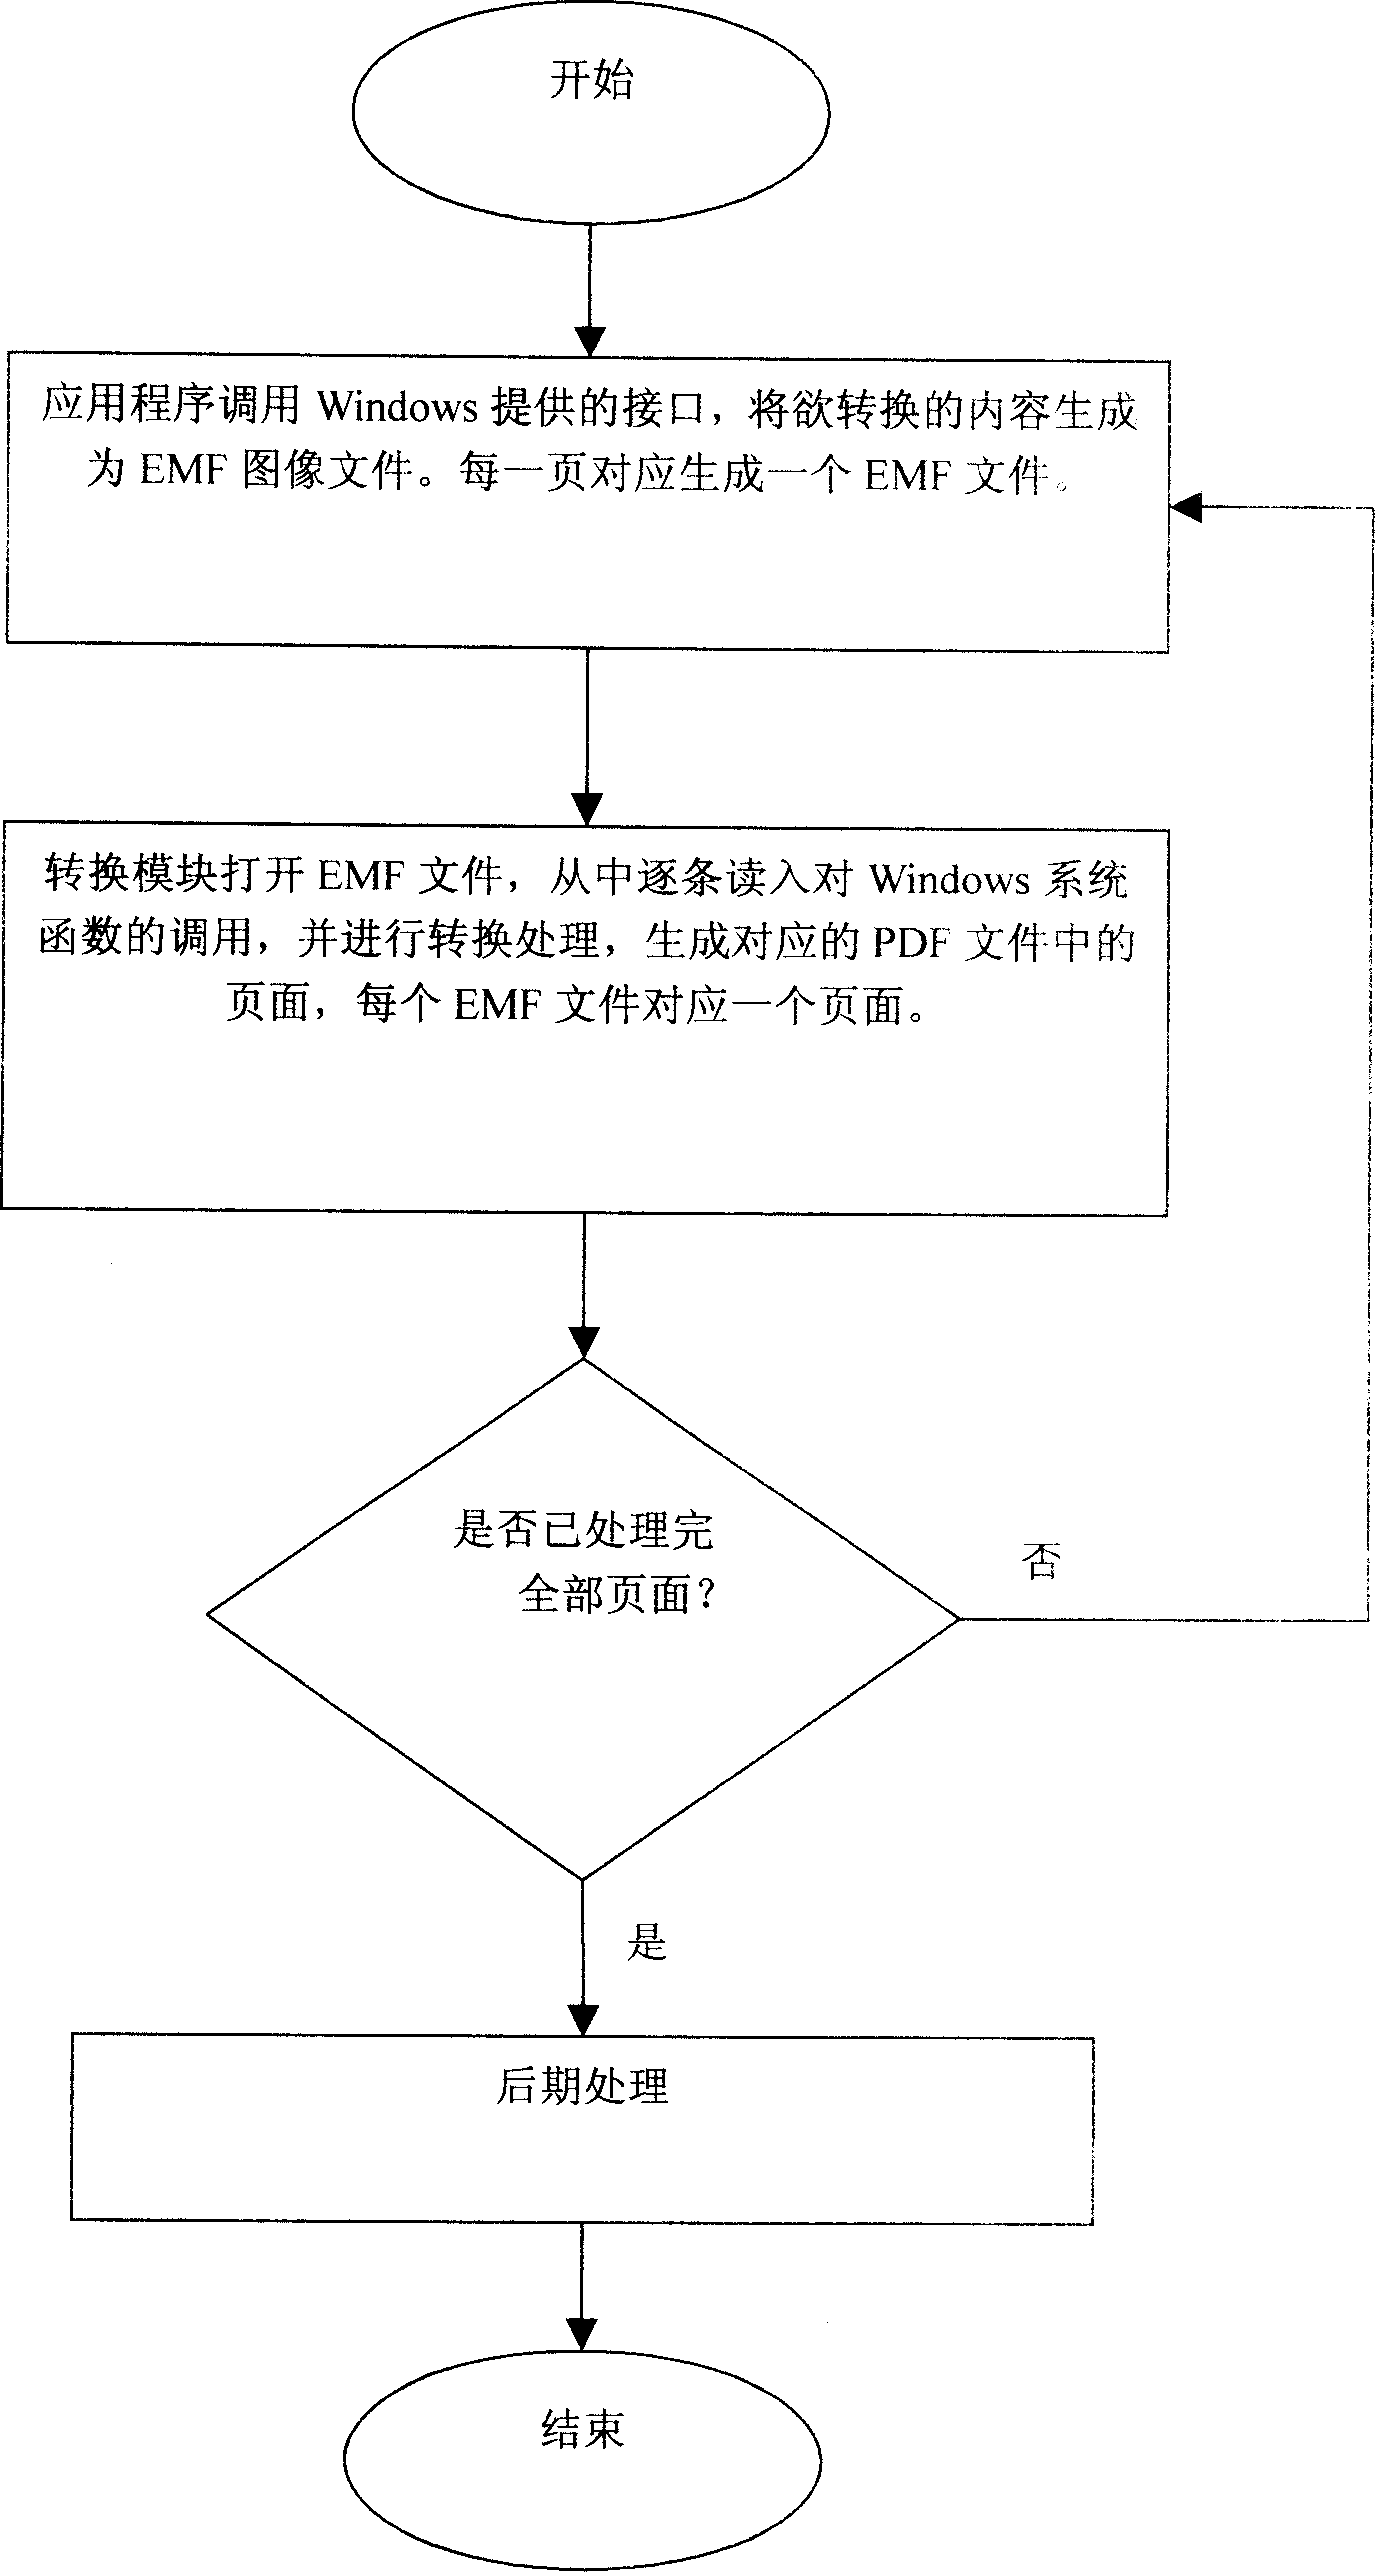 Apparatus and method for generating PDF document